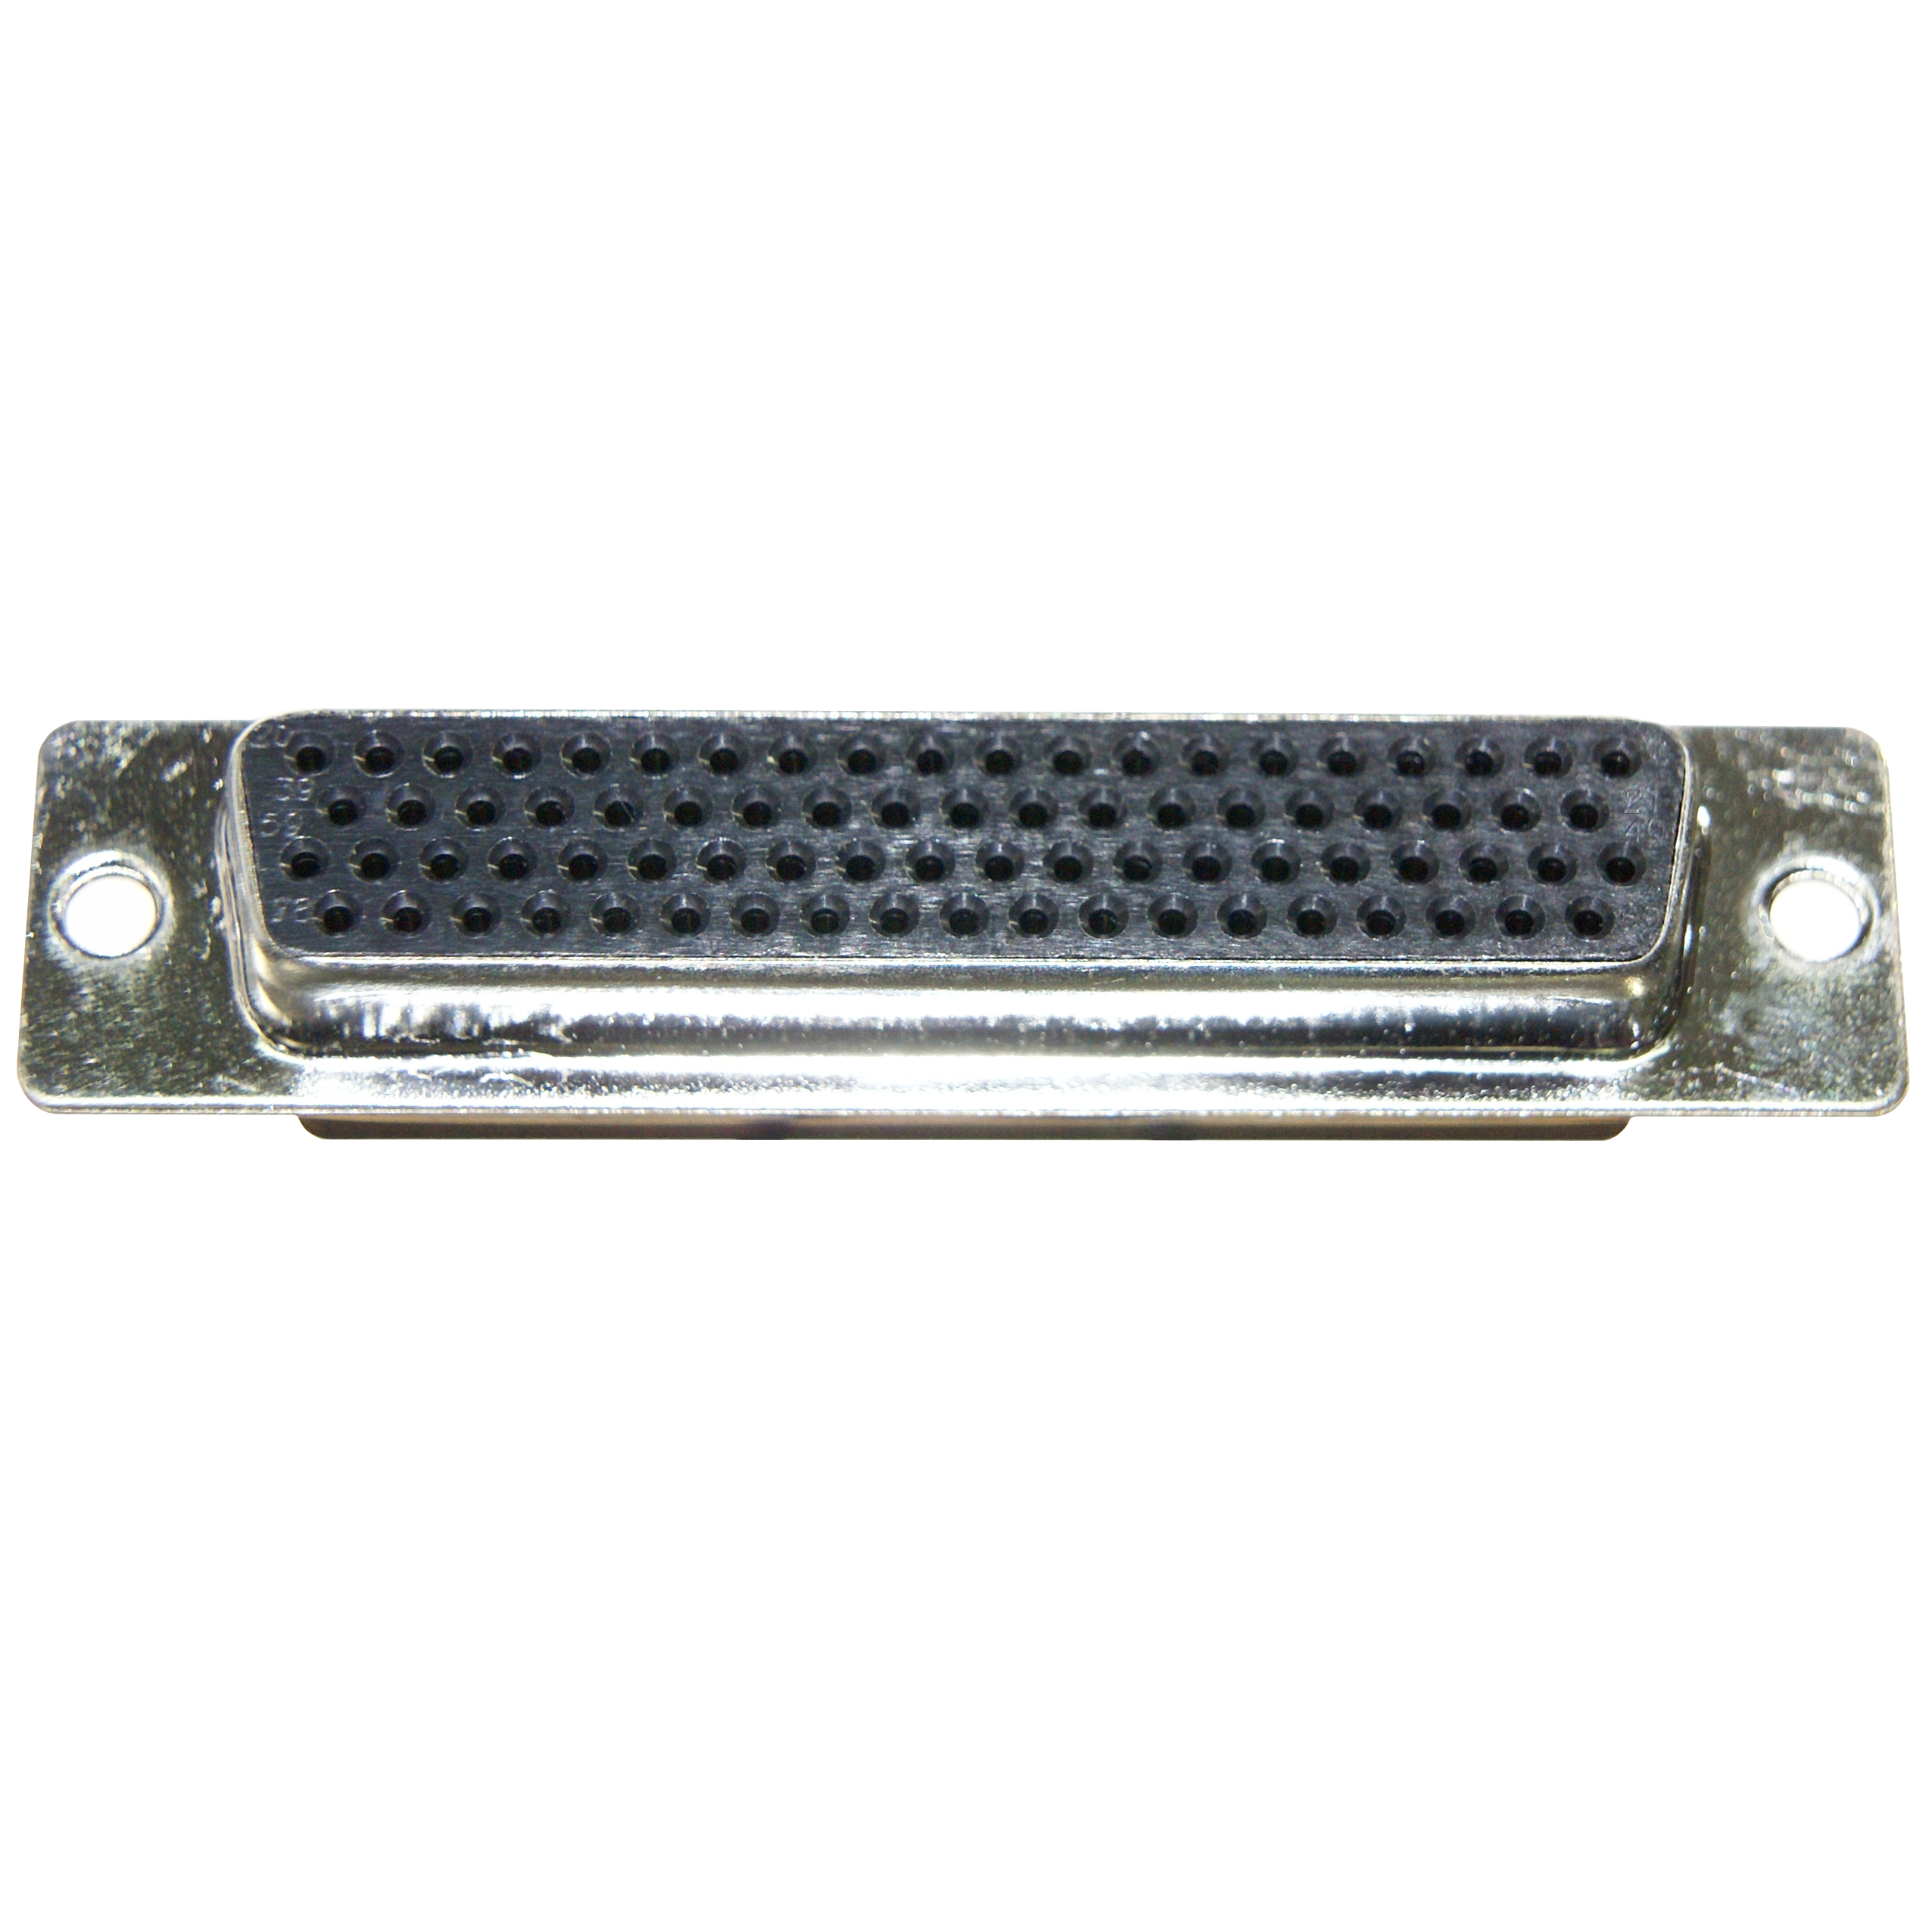 Dsub Connector, High Density, 78 Socket Contacts, Female